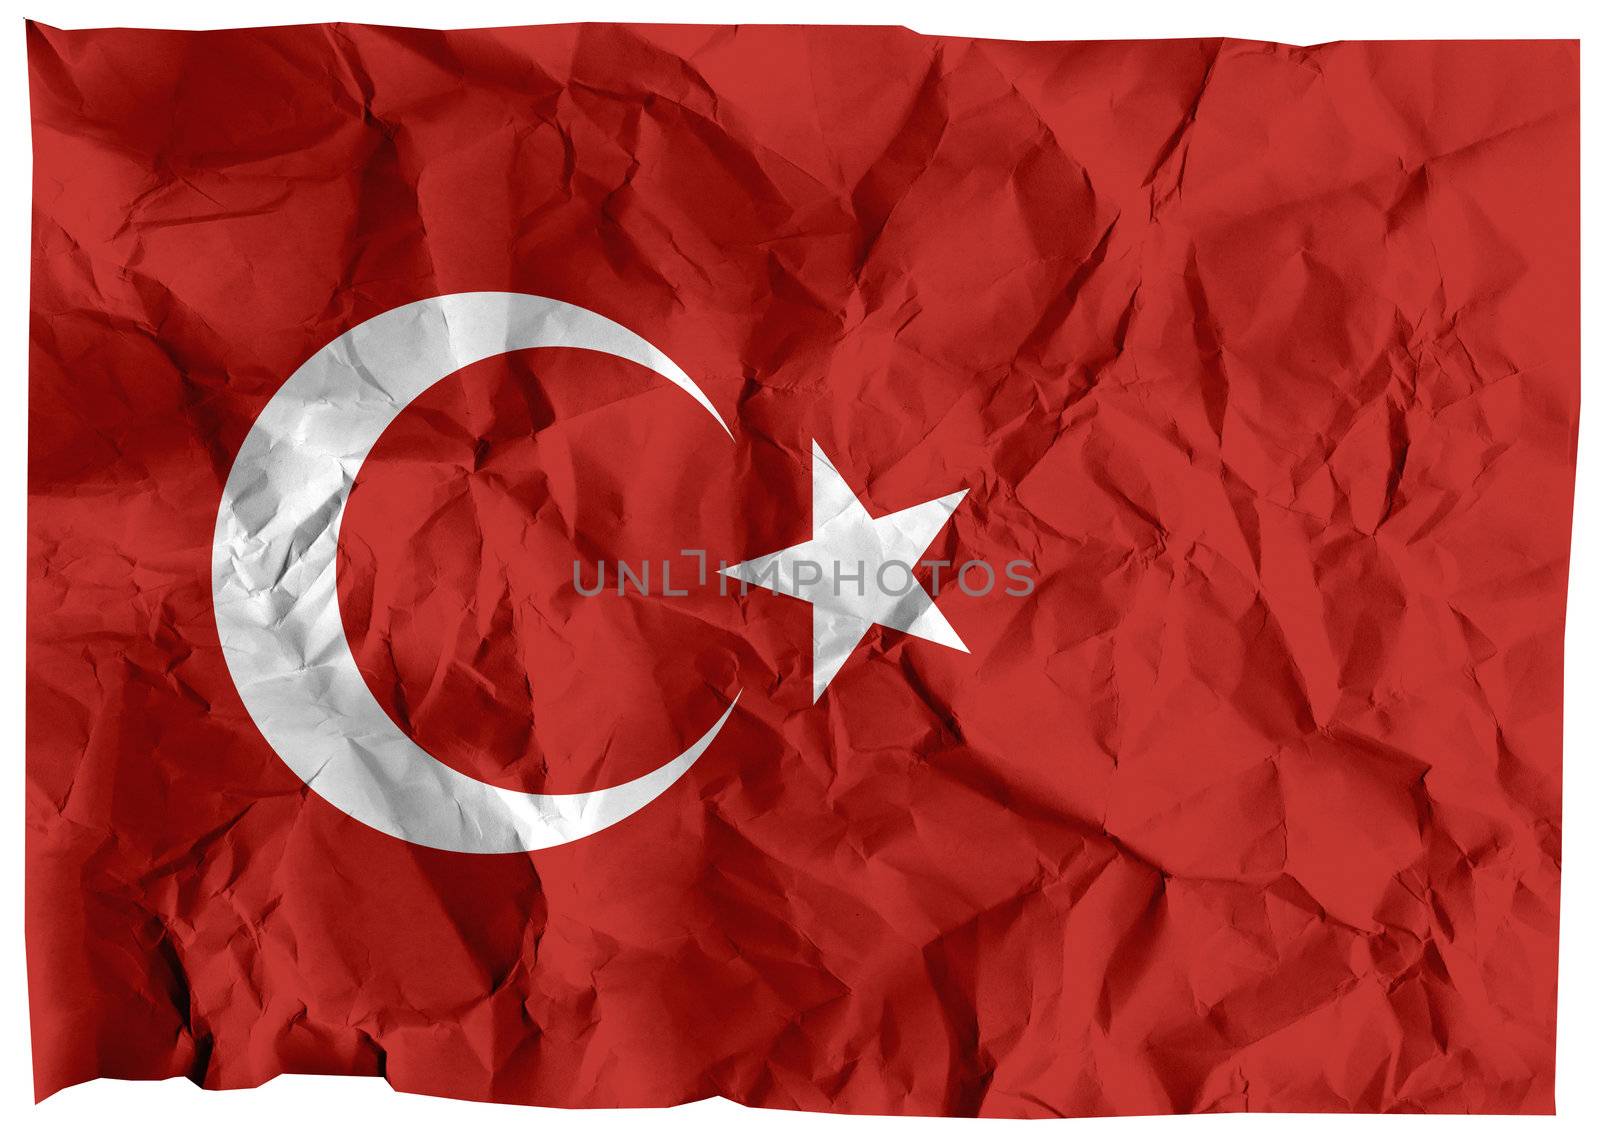 The national flag of Turkey.